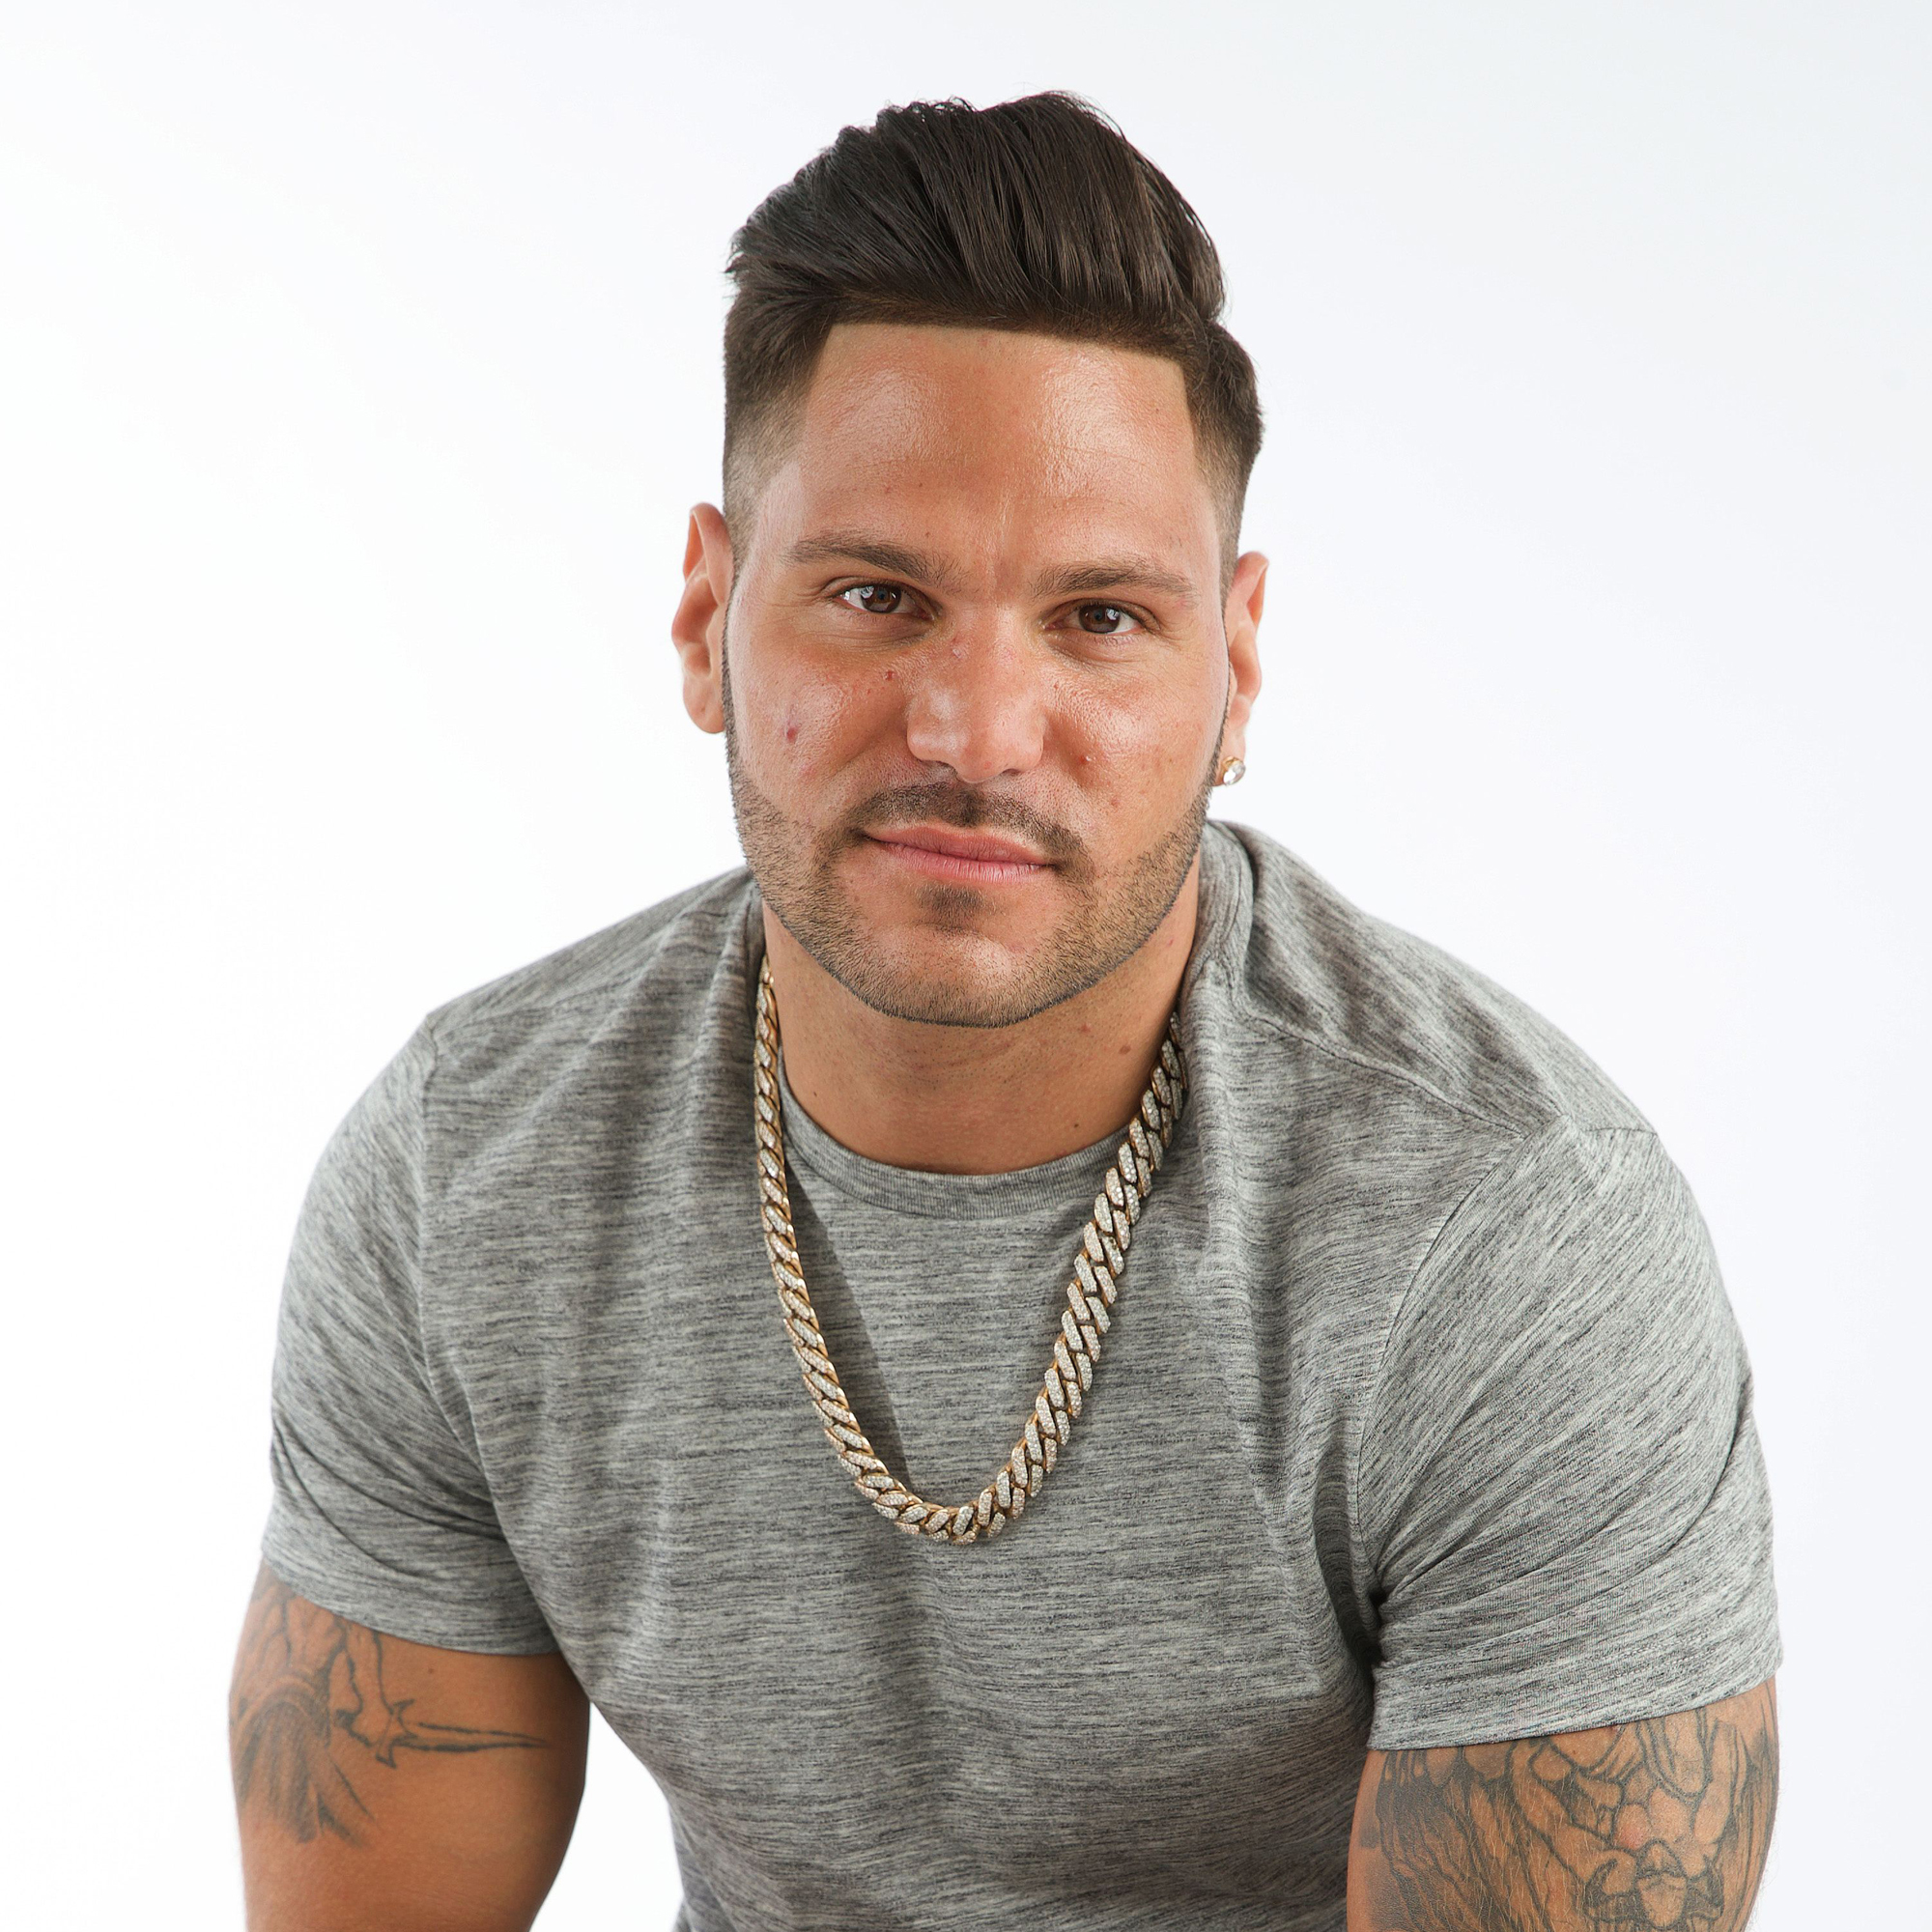 Ronnie Ortiz-Magro: What is the income of the Jersey Shore star?